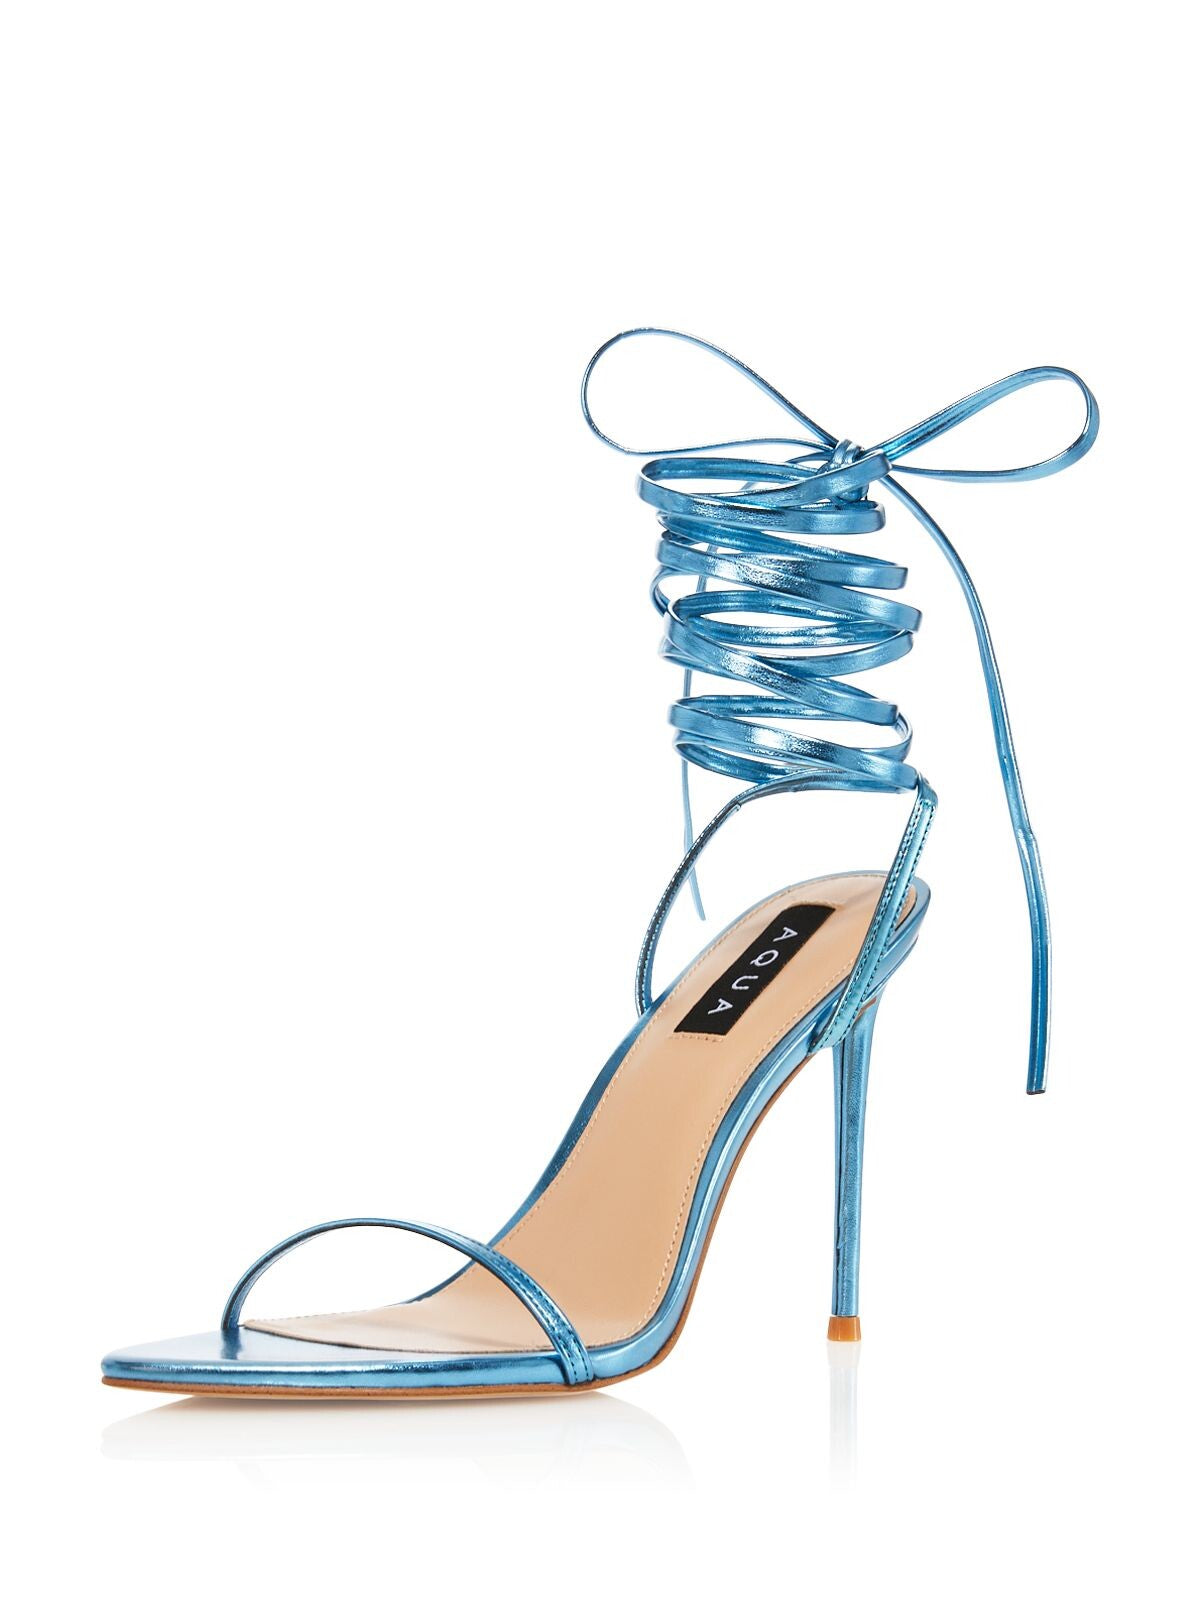 AQUA Womens Blue Wrapping Ankle Straps Padded Mandy Pointed Toe Stiletto Lace-Up Heeled Sandal 8.5 M